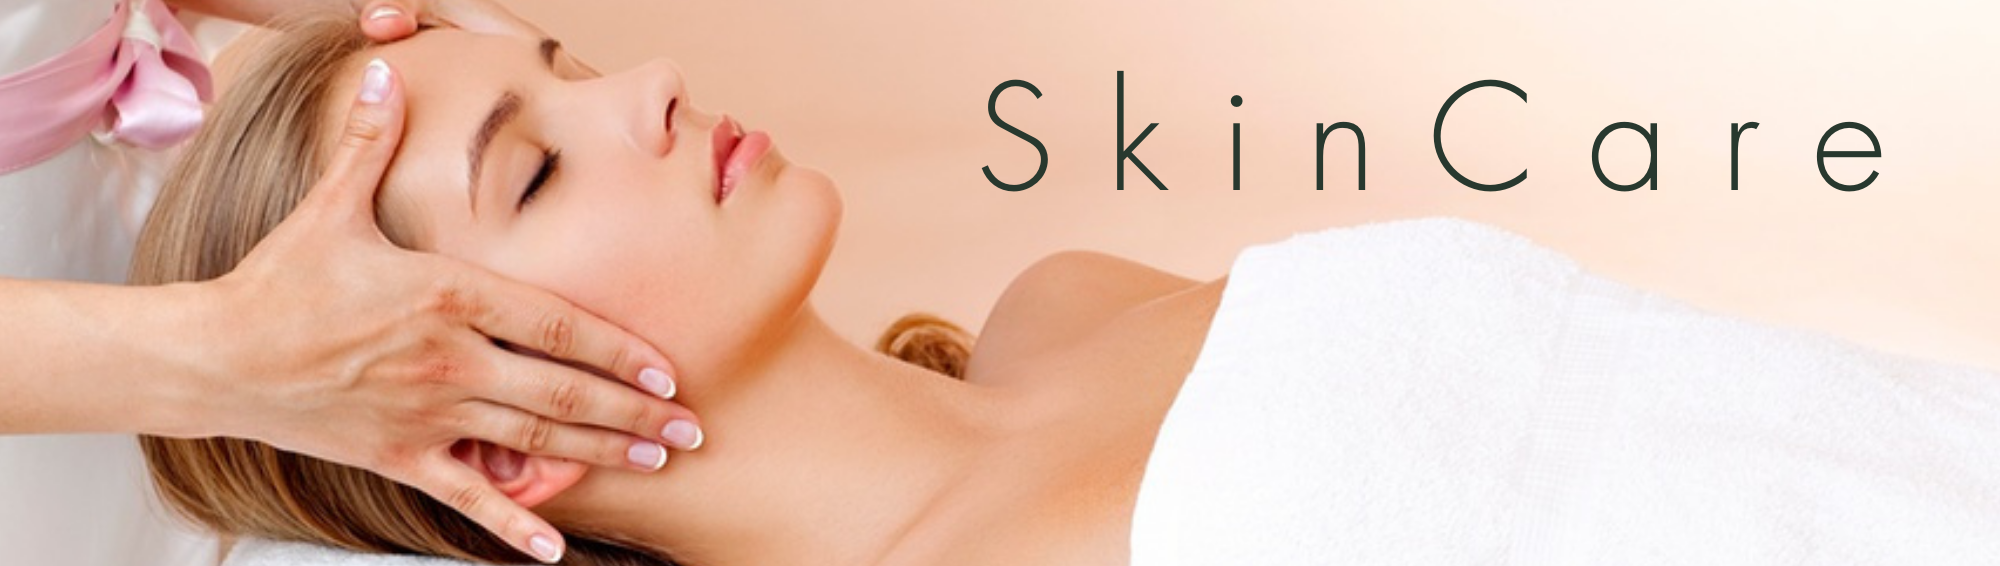 OASIS SPA HEADER (1356 × 300 px) (14.124 × 4 in) (5)-1